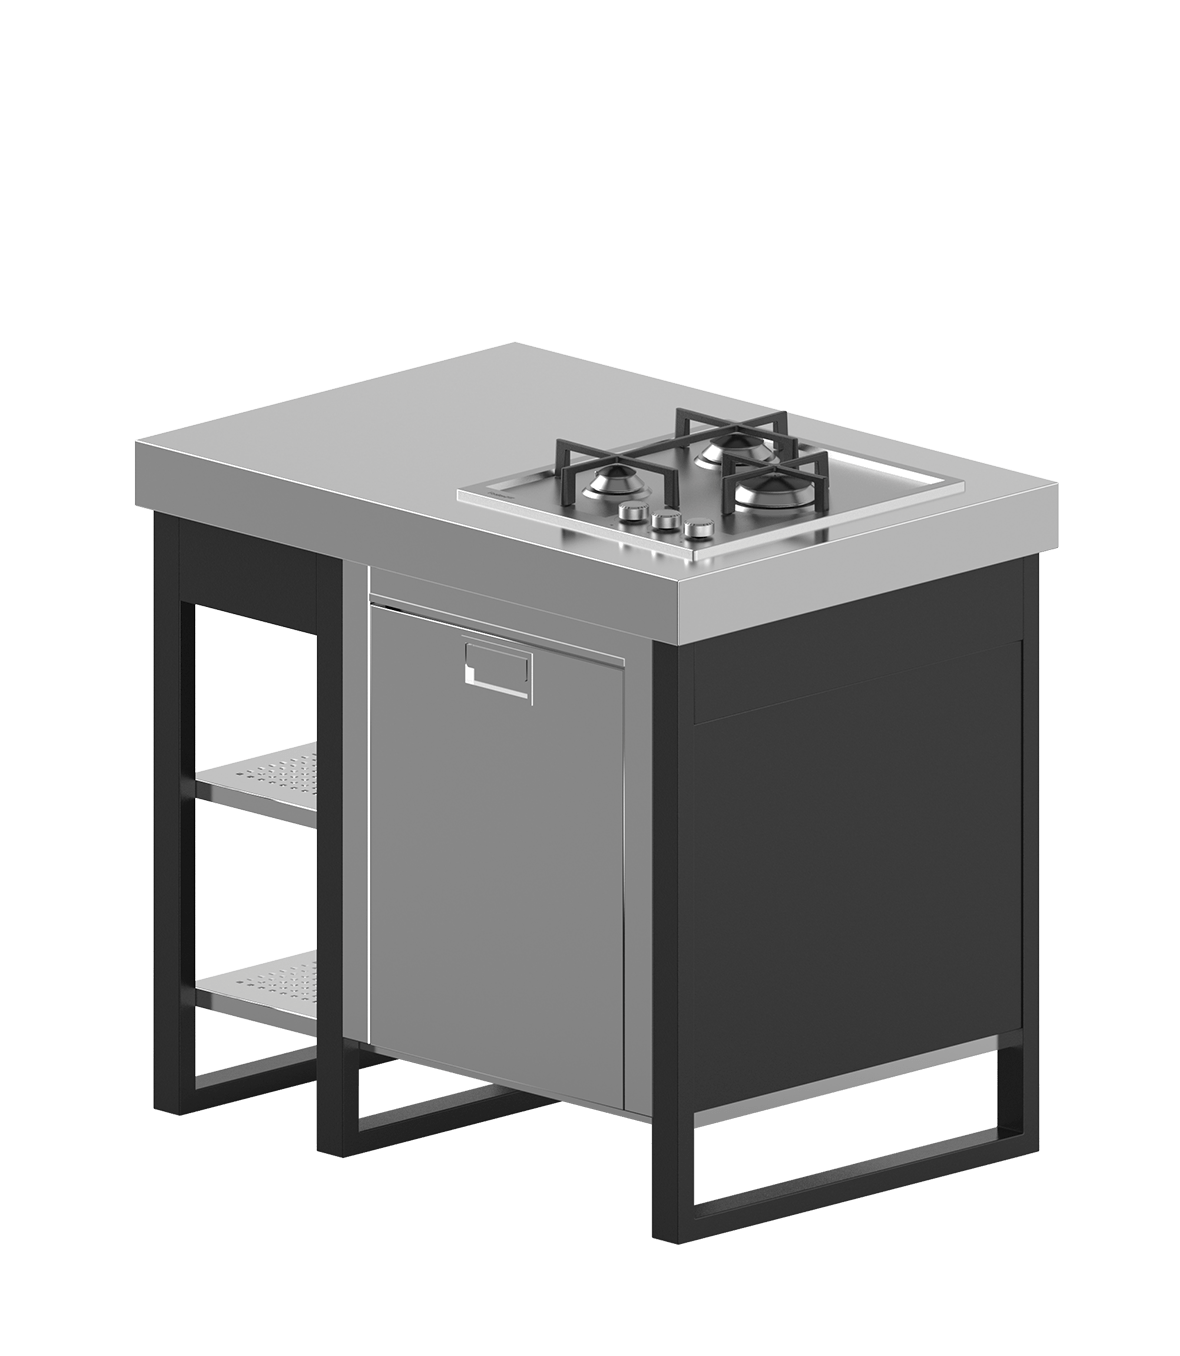 Fridge and gas cooking module 700+300